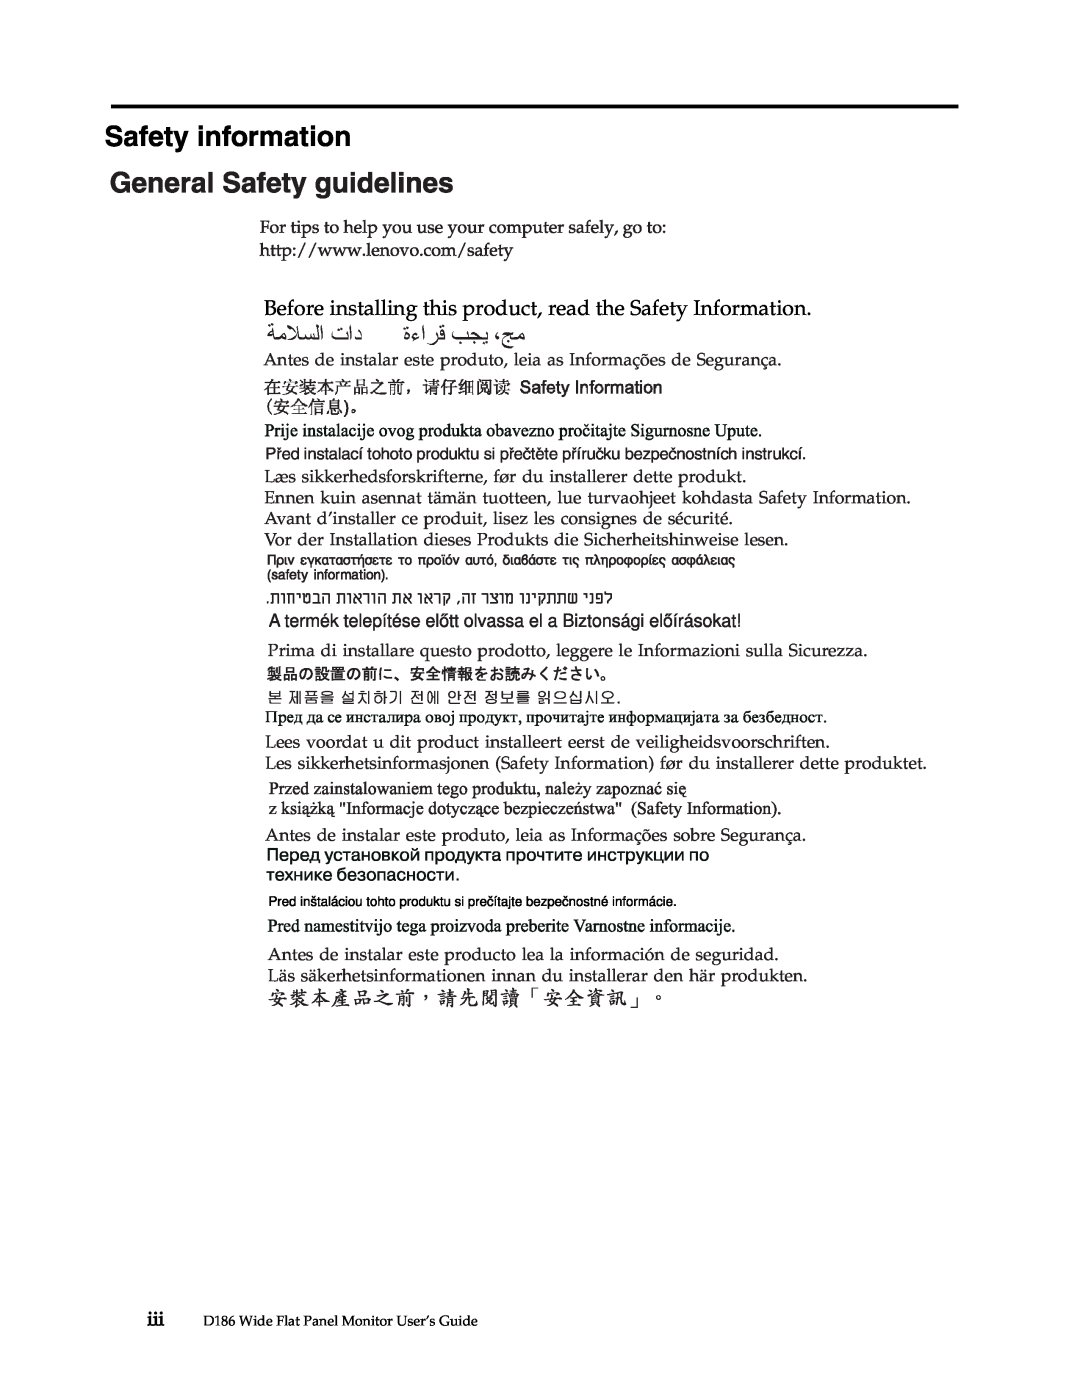 Lenovo D186 manual Safety information, Before installing this product, read the Safety Information 